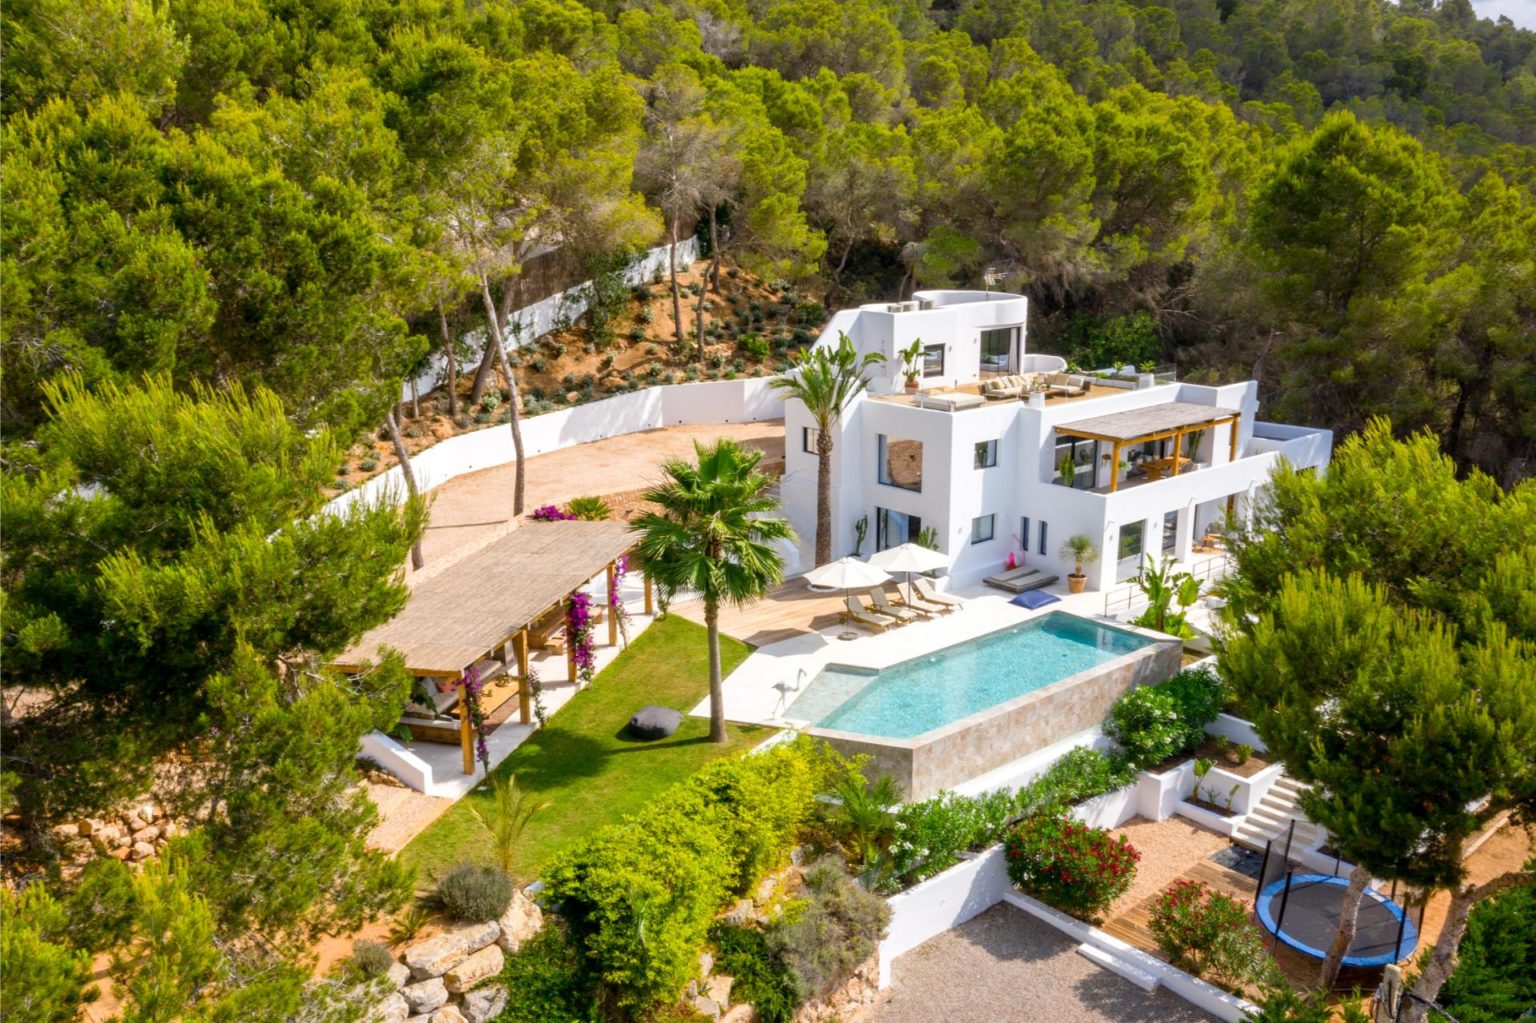 Impeccable villa with panoramic views to Formentera